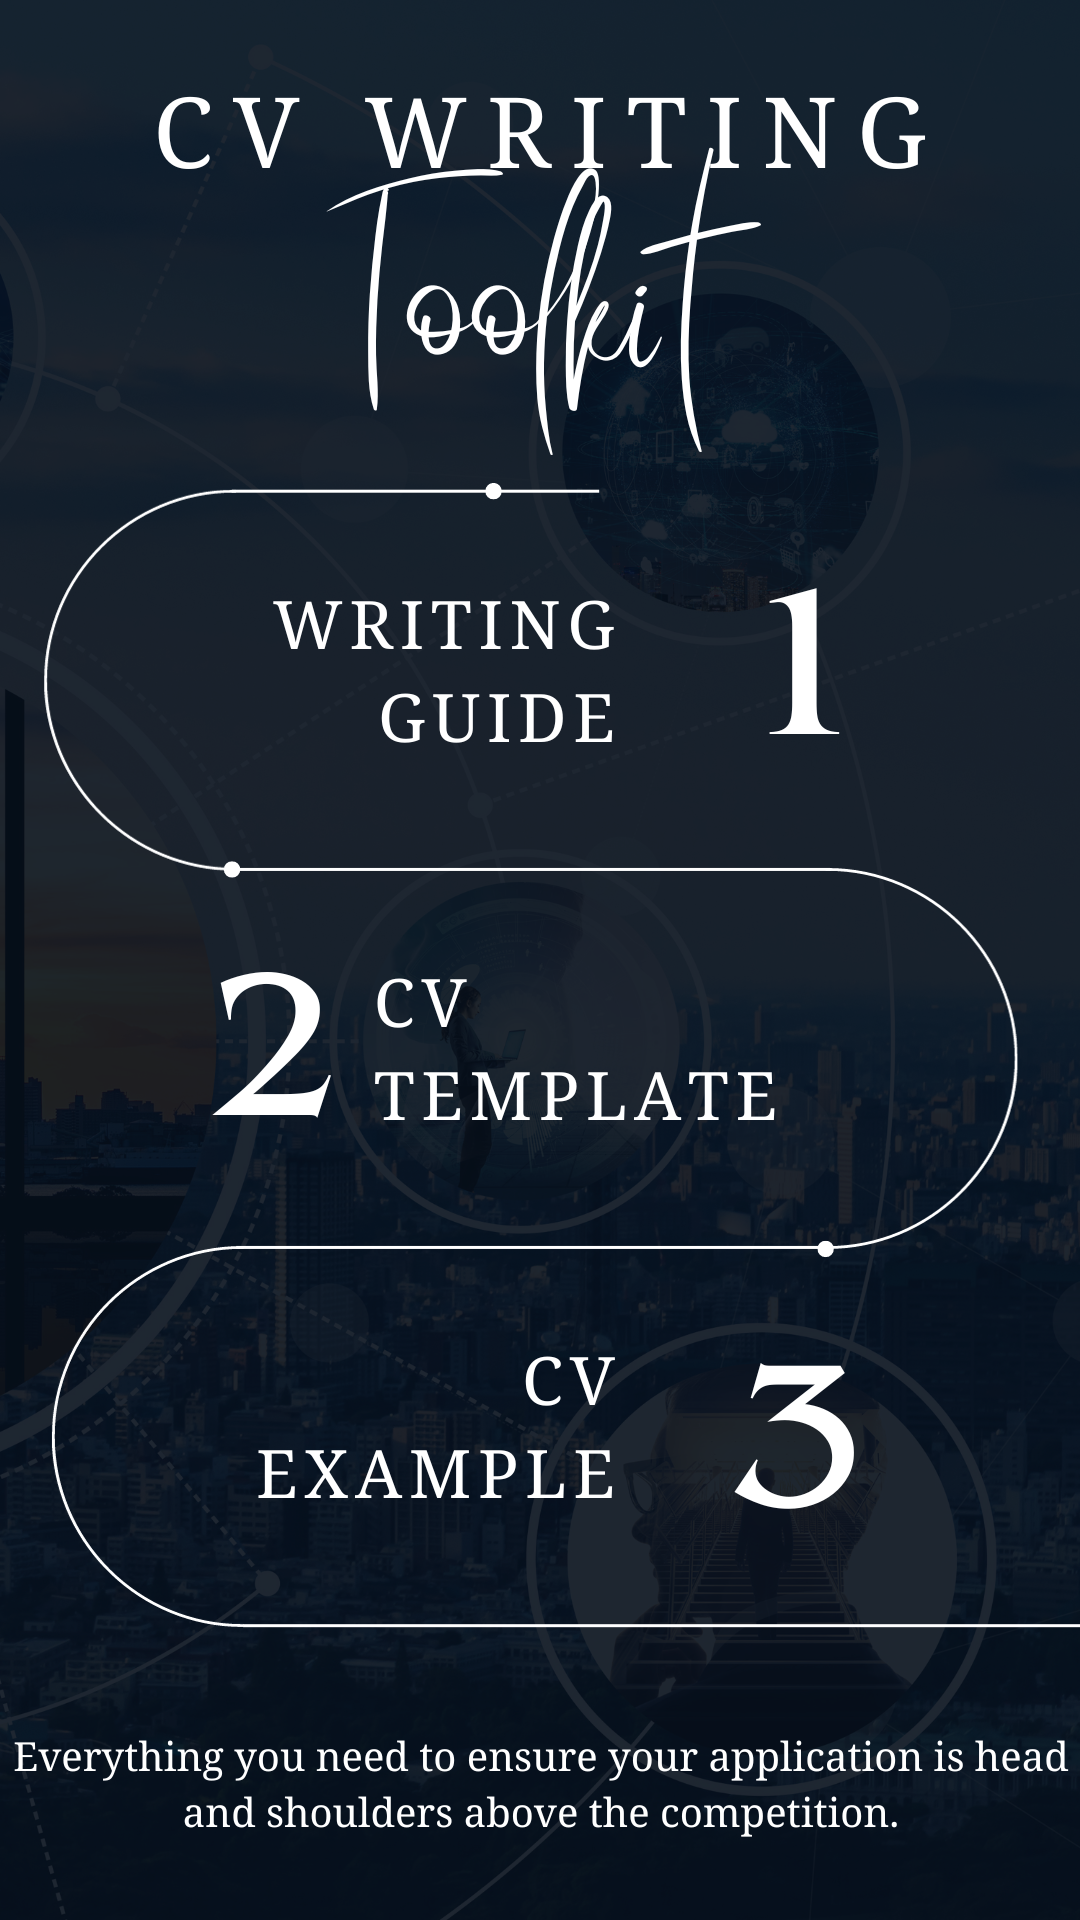 Compliance Officer CV Writing Toolkit